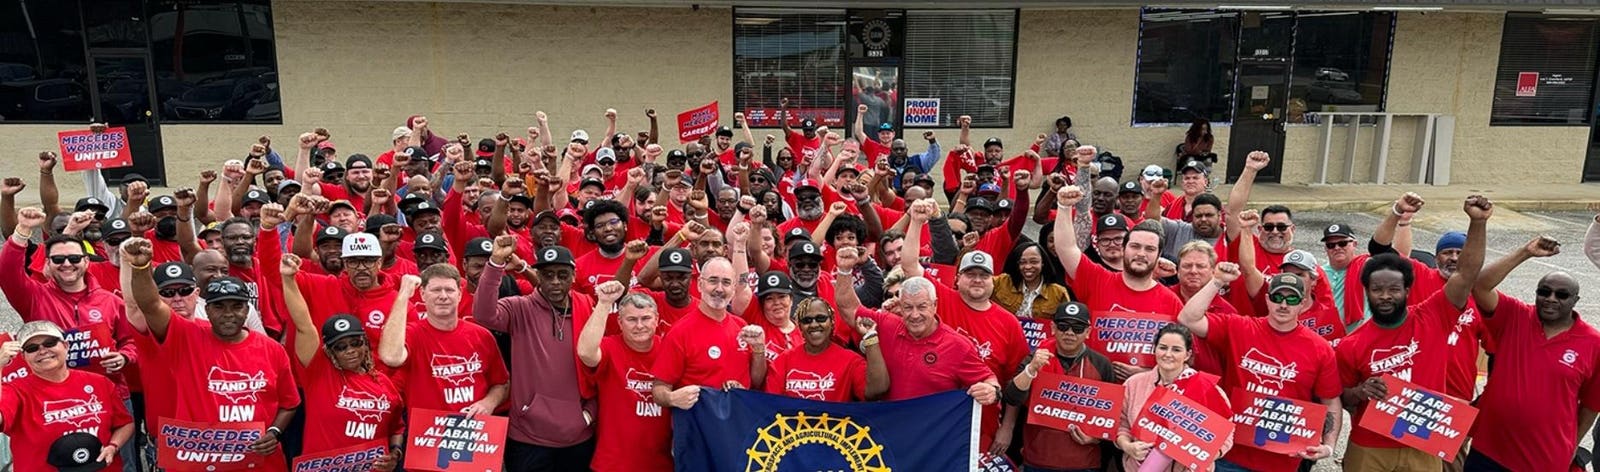 Alabama Mercedes-Benz Workers Reject UAW